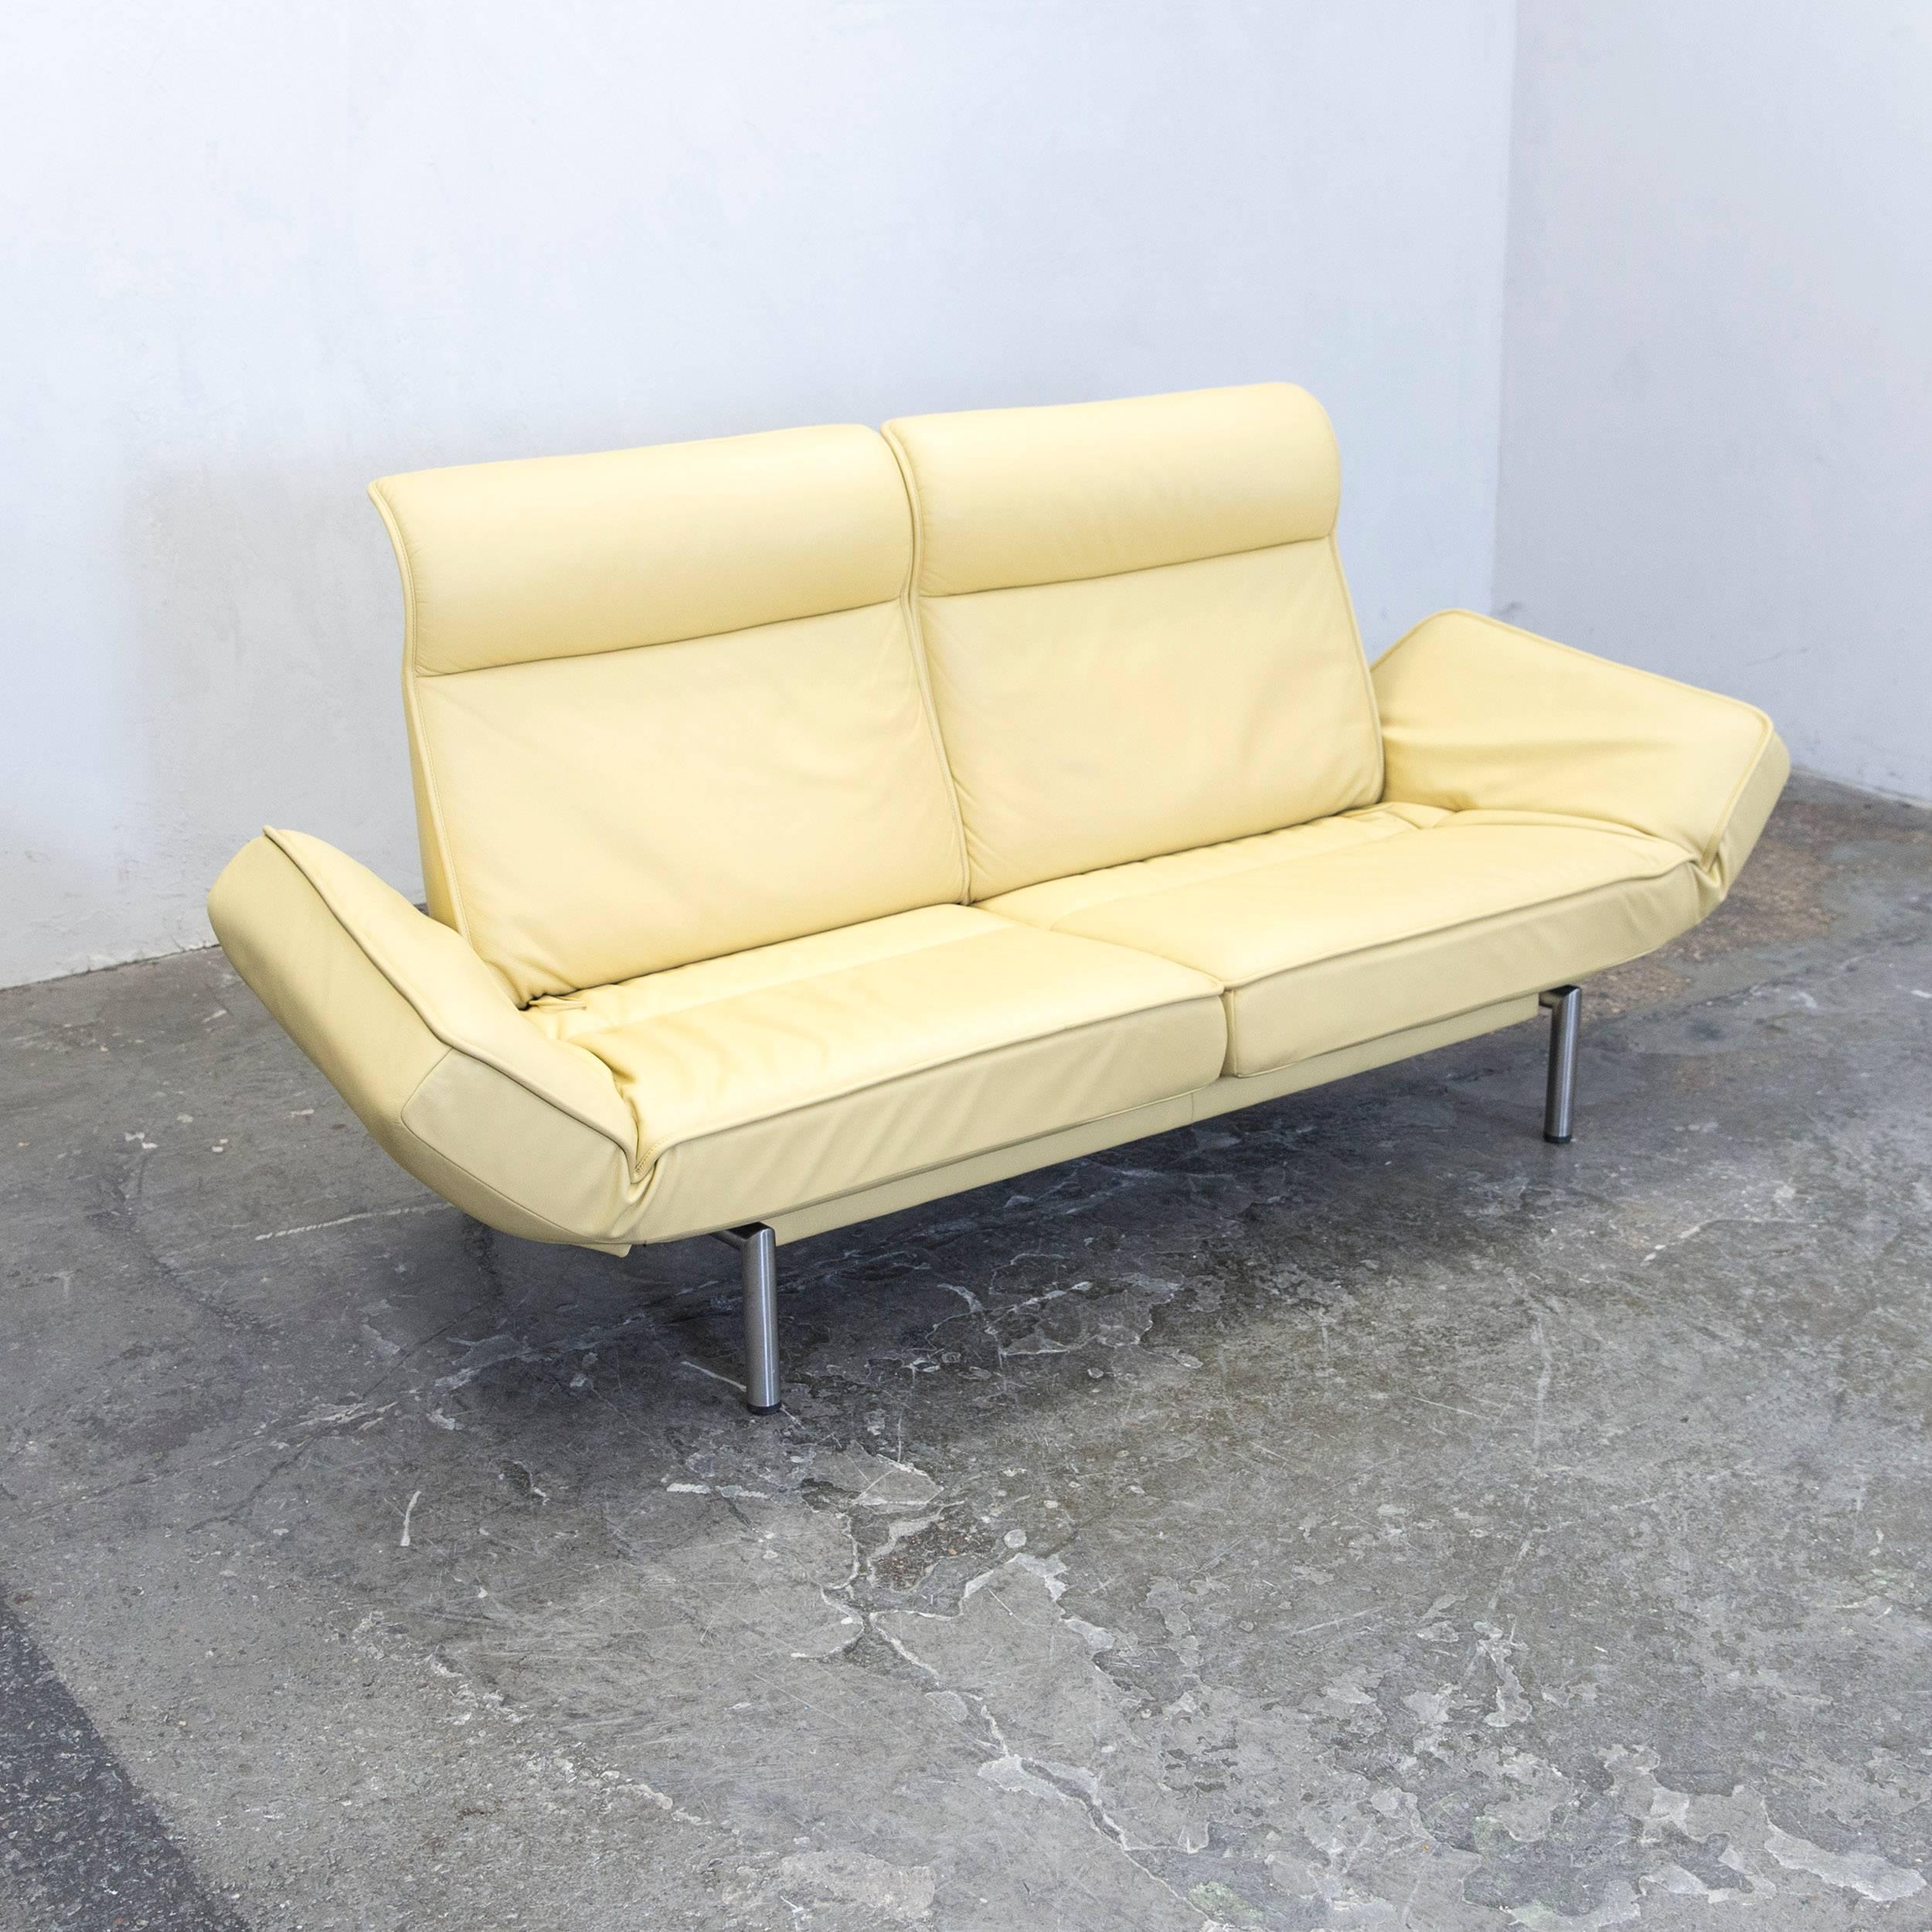 Yellow beige colored original De Sede DS 450 designer leather sofa in a minimalistic and modern design, with convenient functions, made for pure comfort and flexibility.